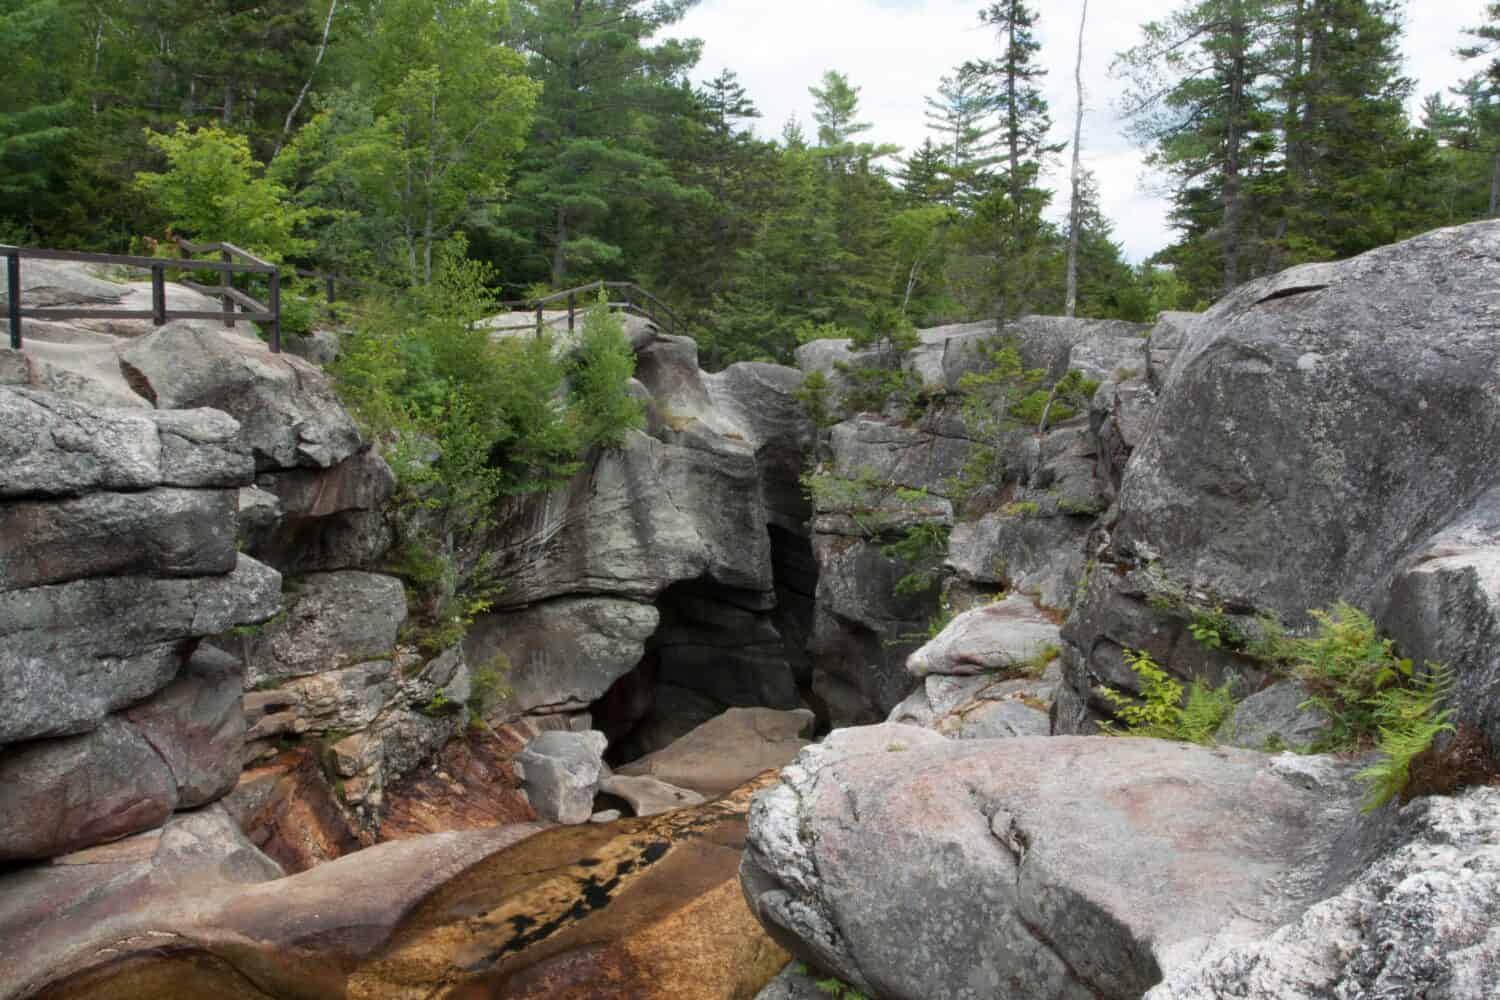 One of the most incredible caves, Moose Cave, is found in Grafton Notch State Park.